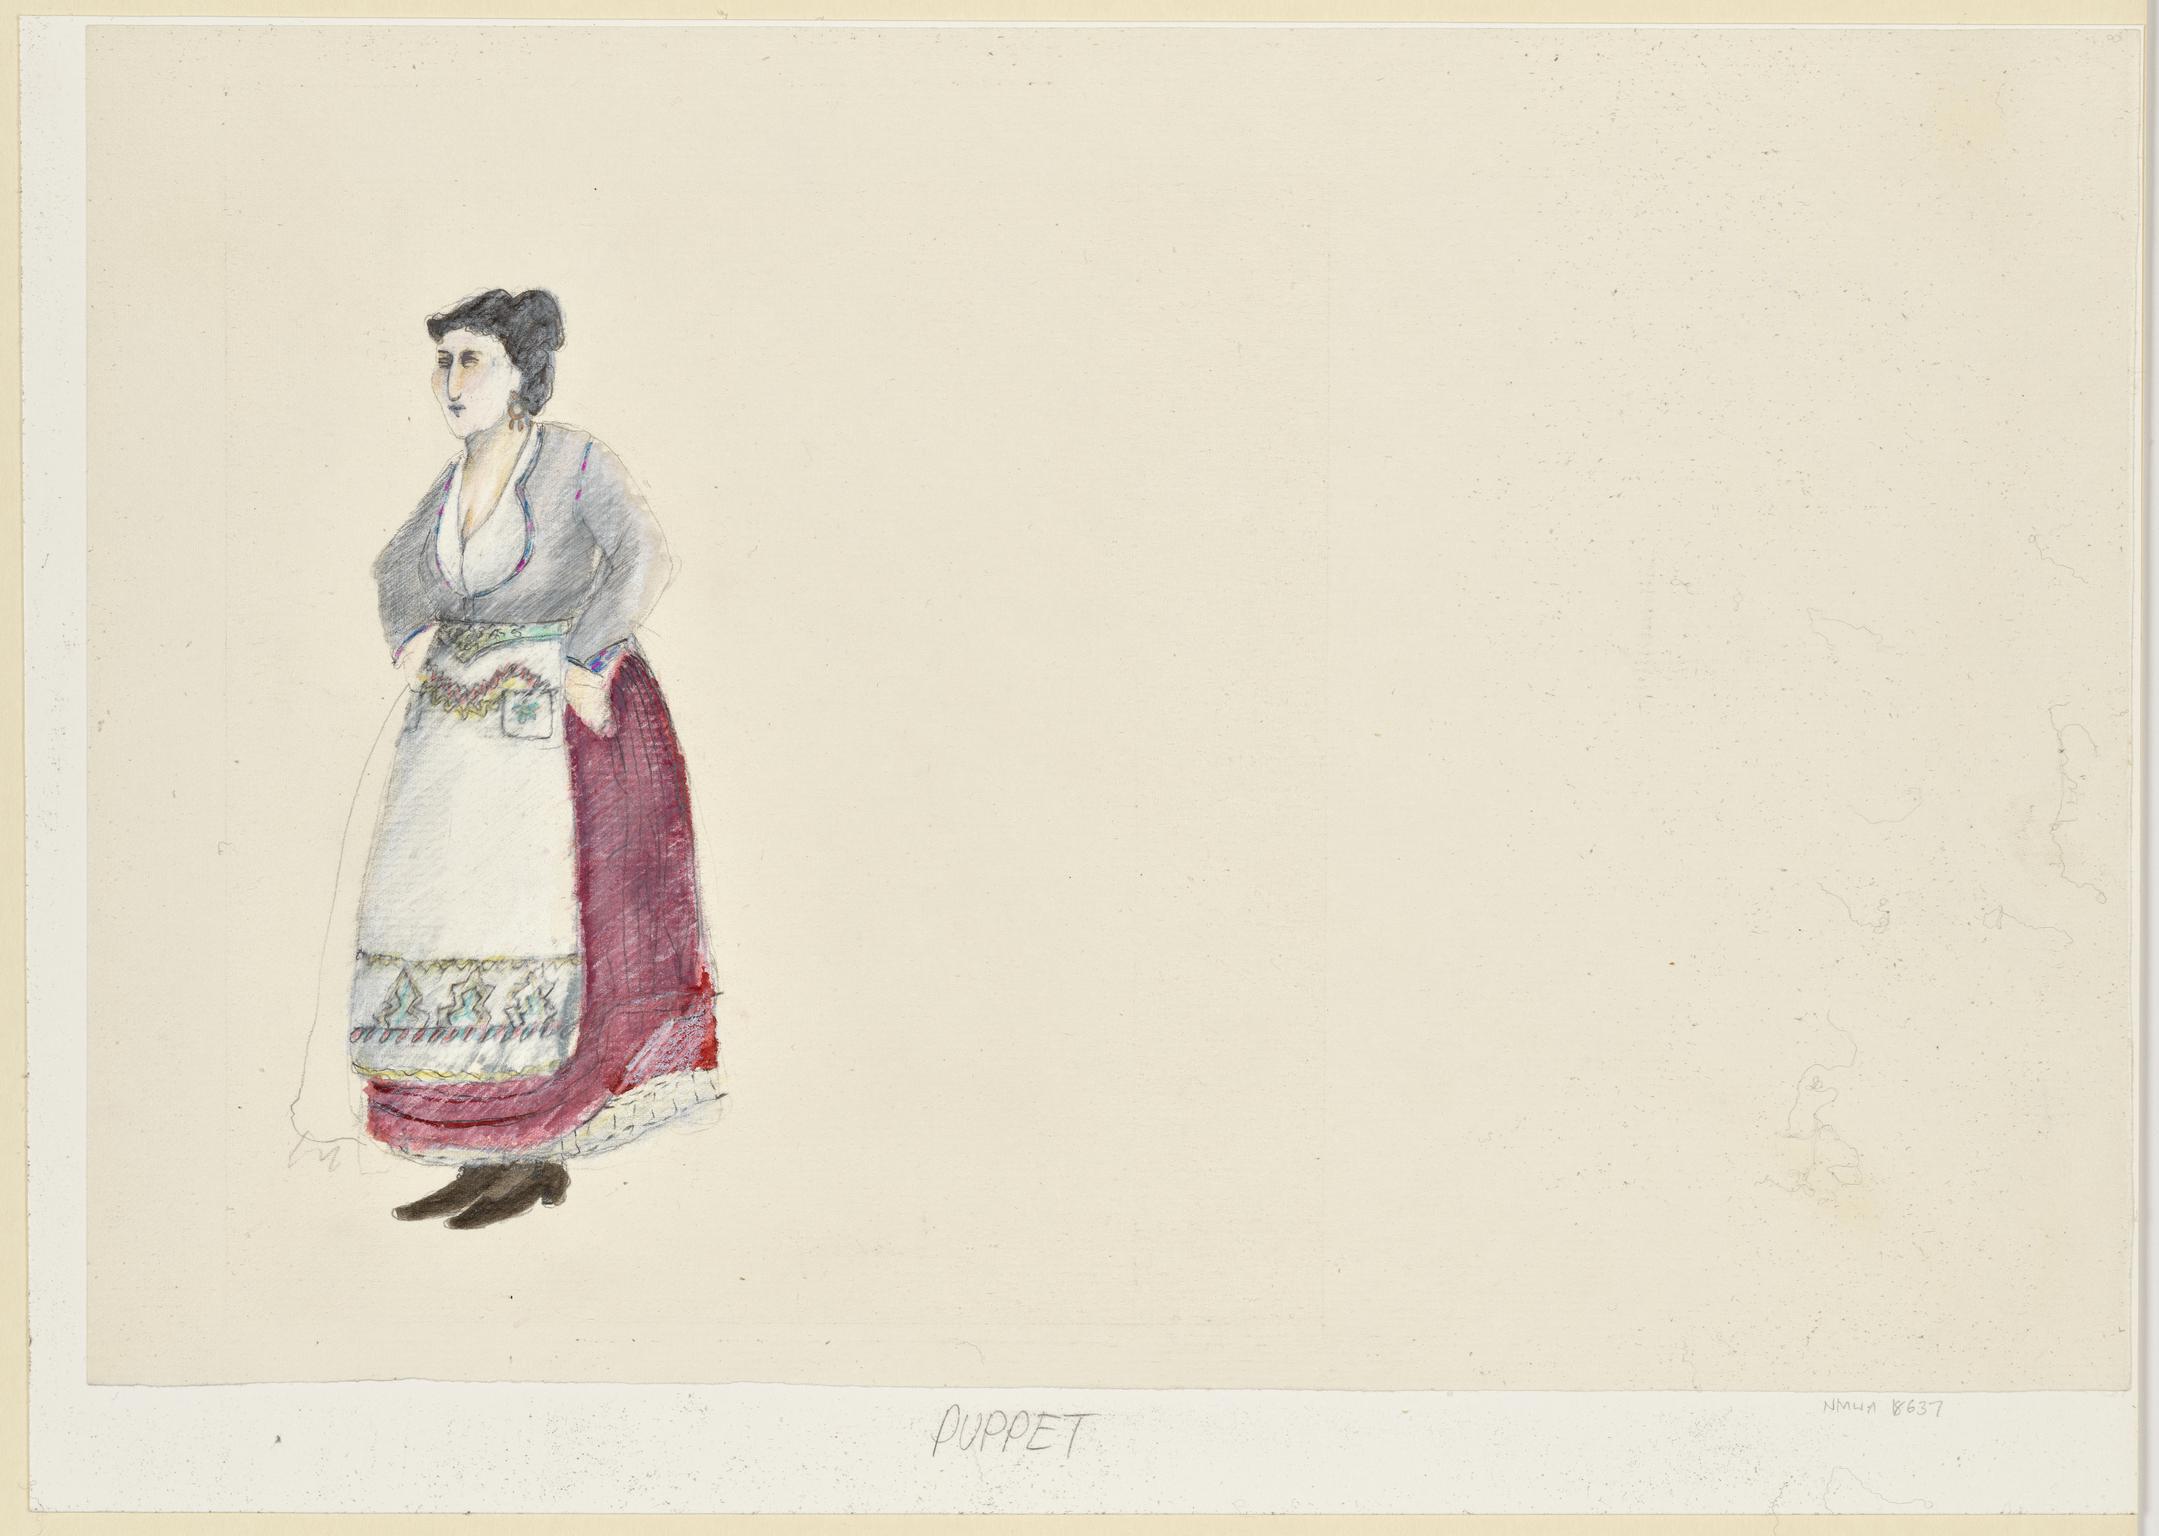 Puppet, from Martinu's 'Greek Passion'